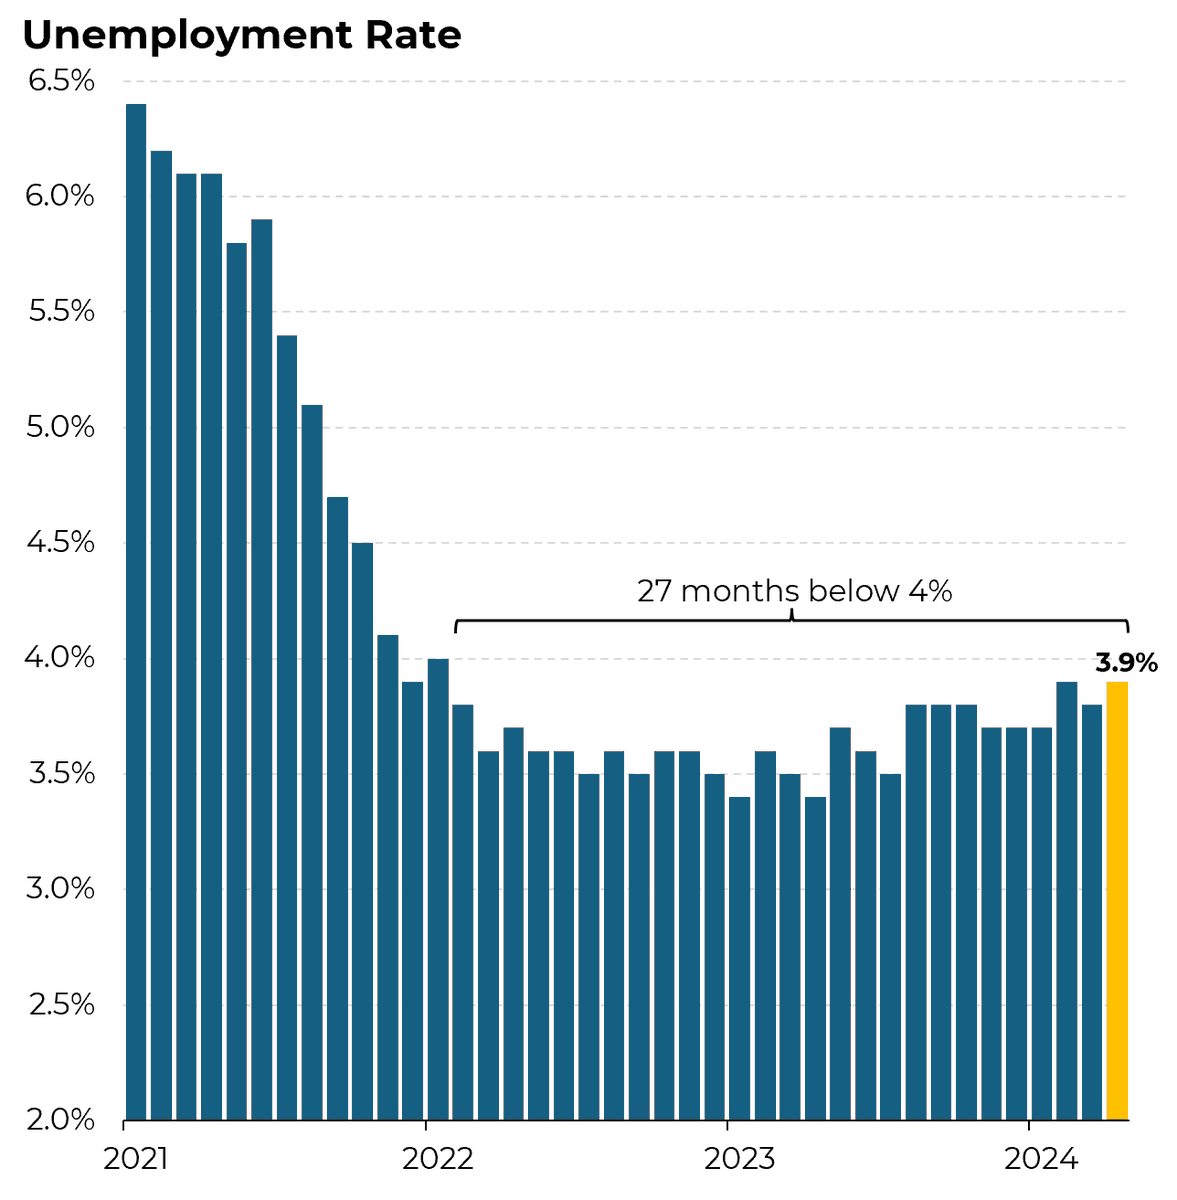 Unemployment has ticked up slightly over the last year, though we remain at historically low levels. (27 consecutive months below 4%, the longest such stretch since the 1960s!) @Morning_Joe